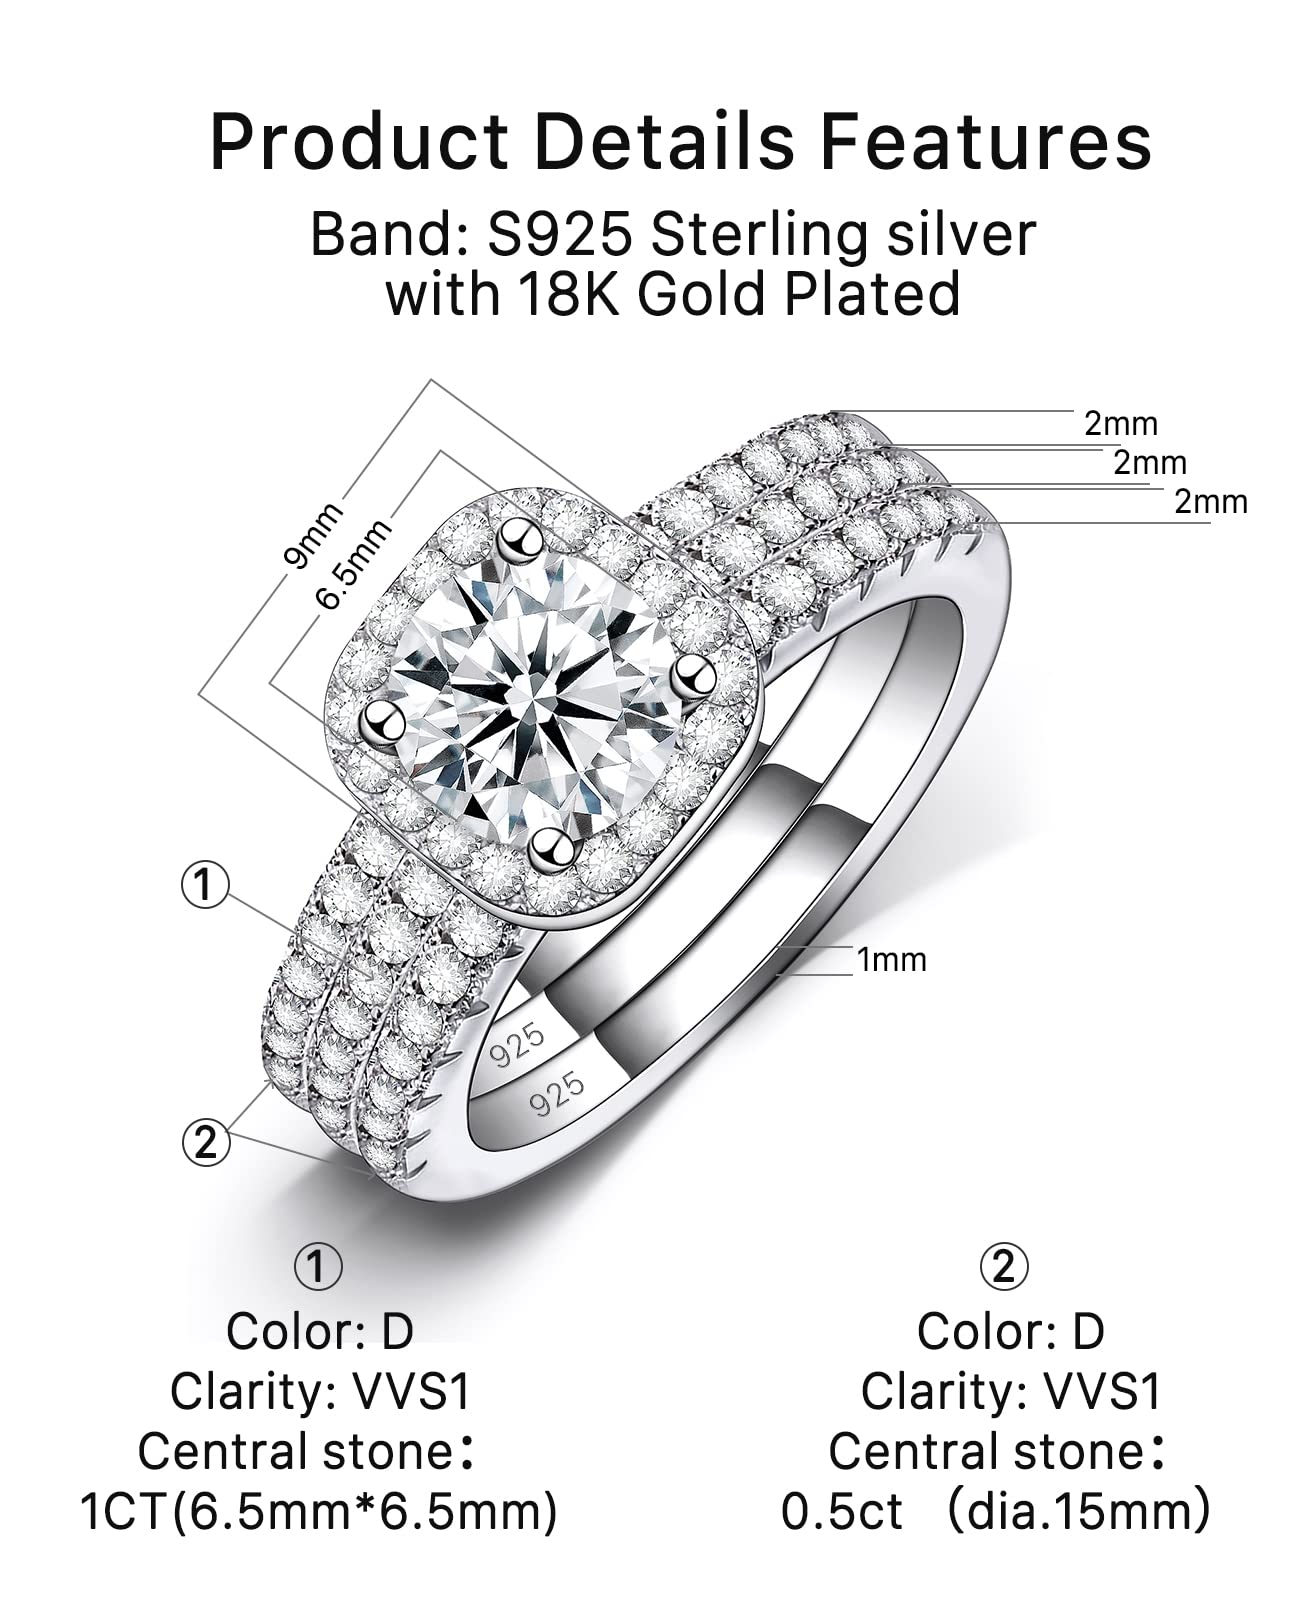 Ring Size Chart - Choose from diamond, band, gemstone or fashion rings